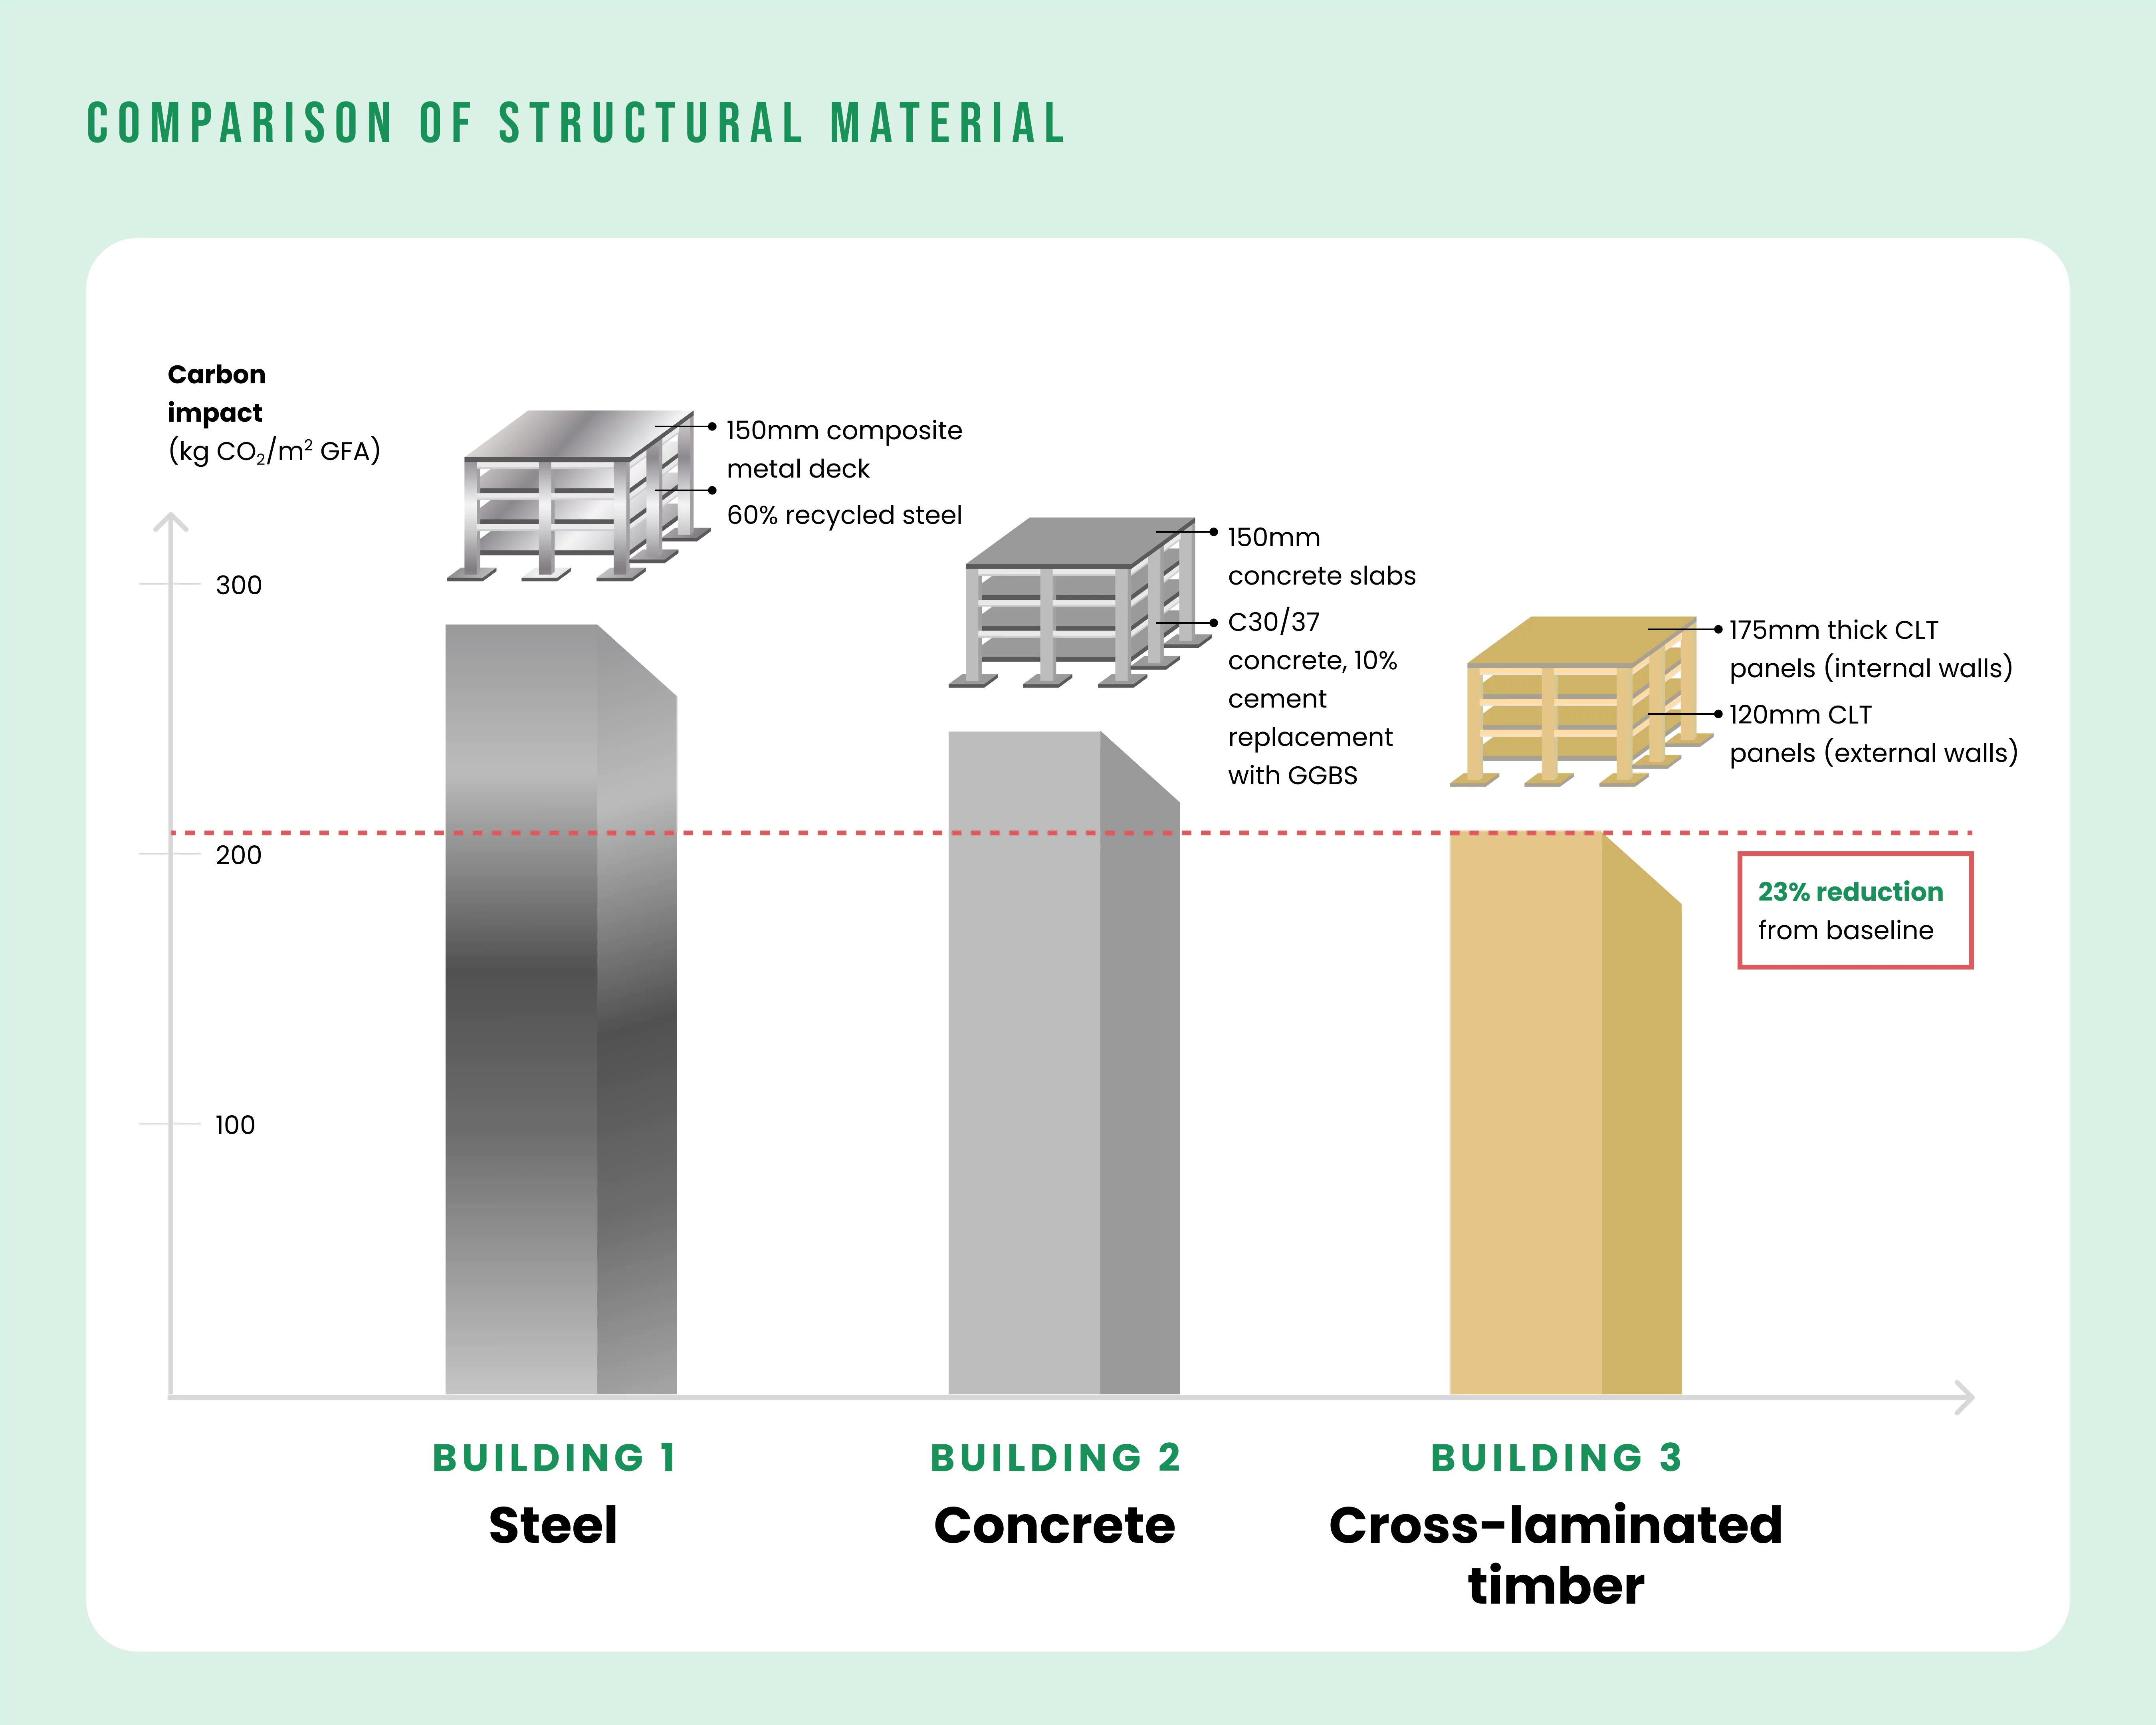 casestudies_image_strctural-timber_comparison-structural-material